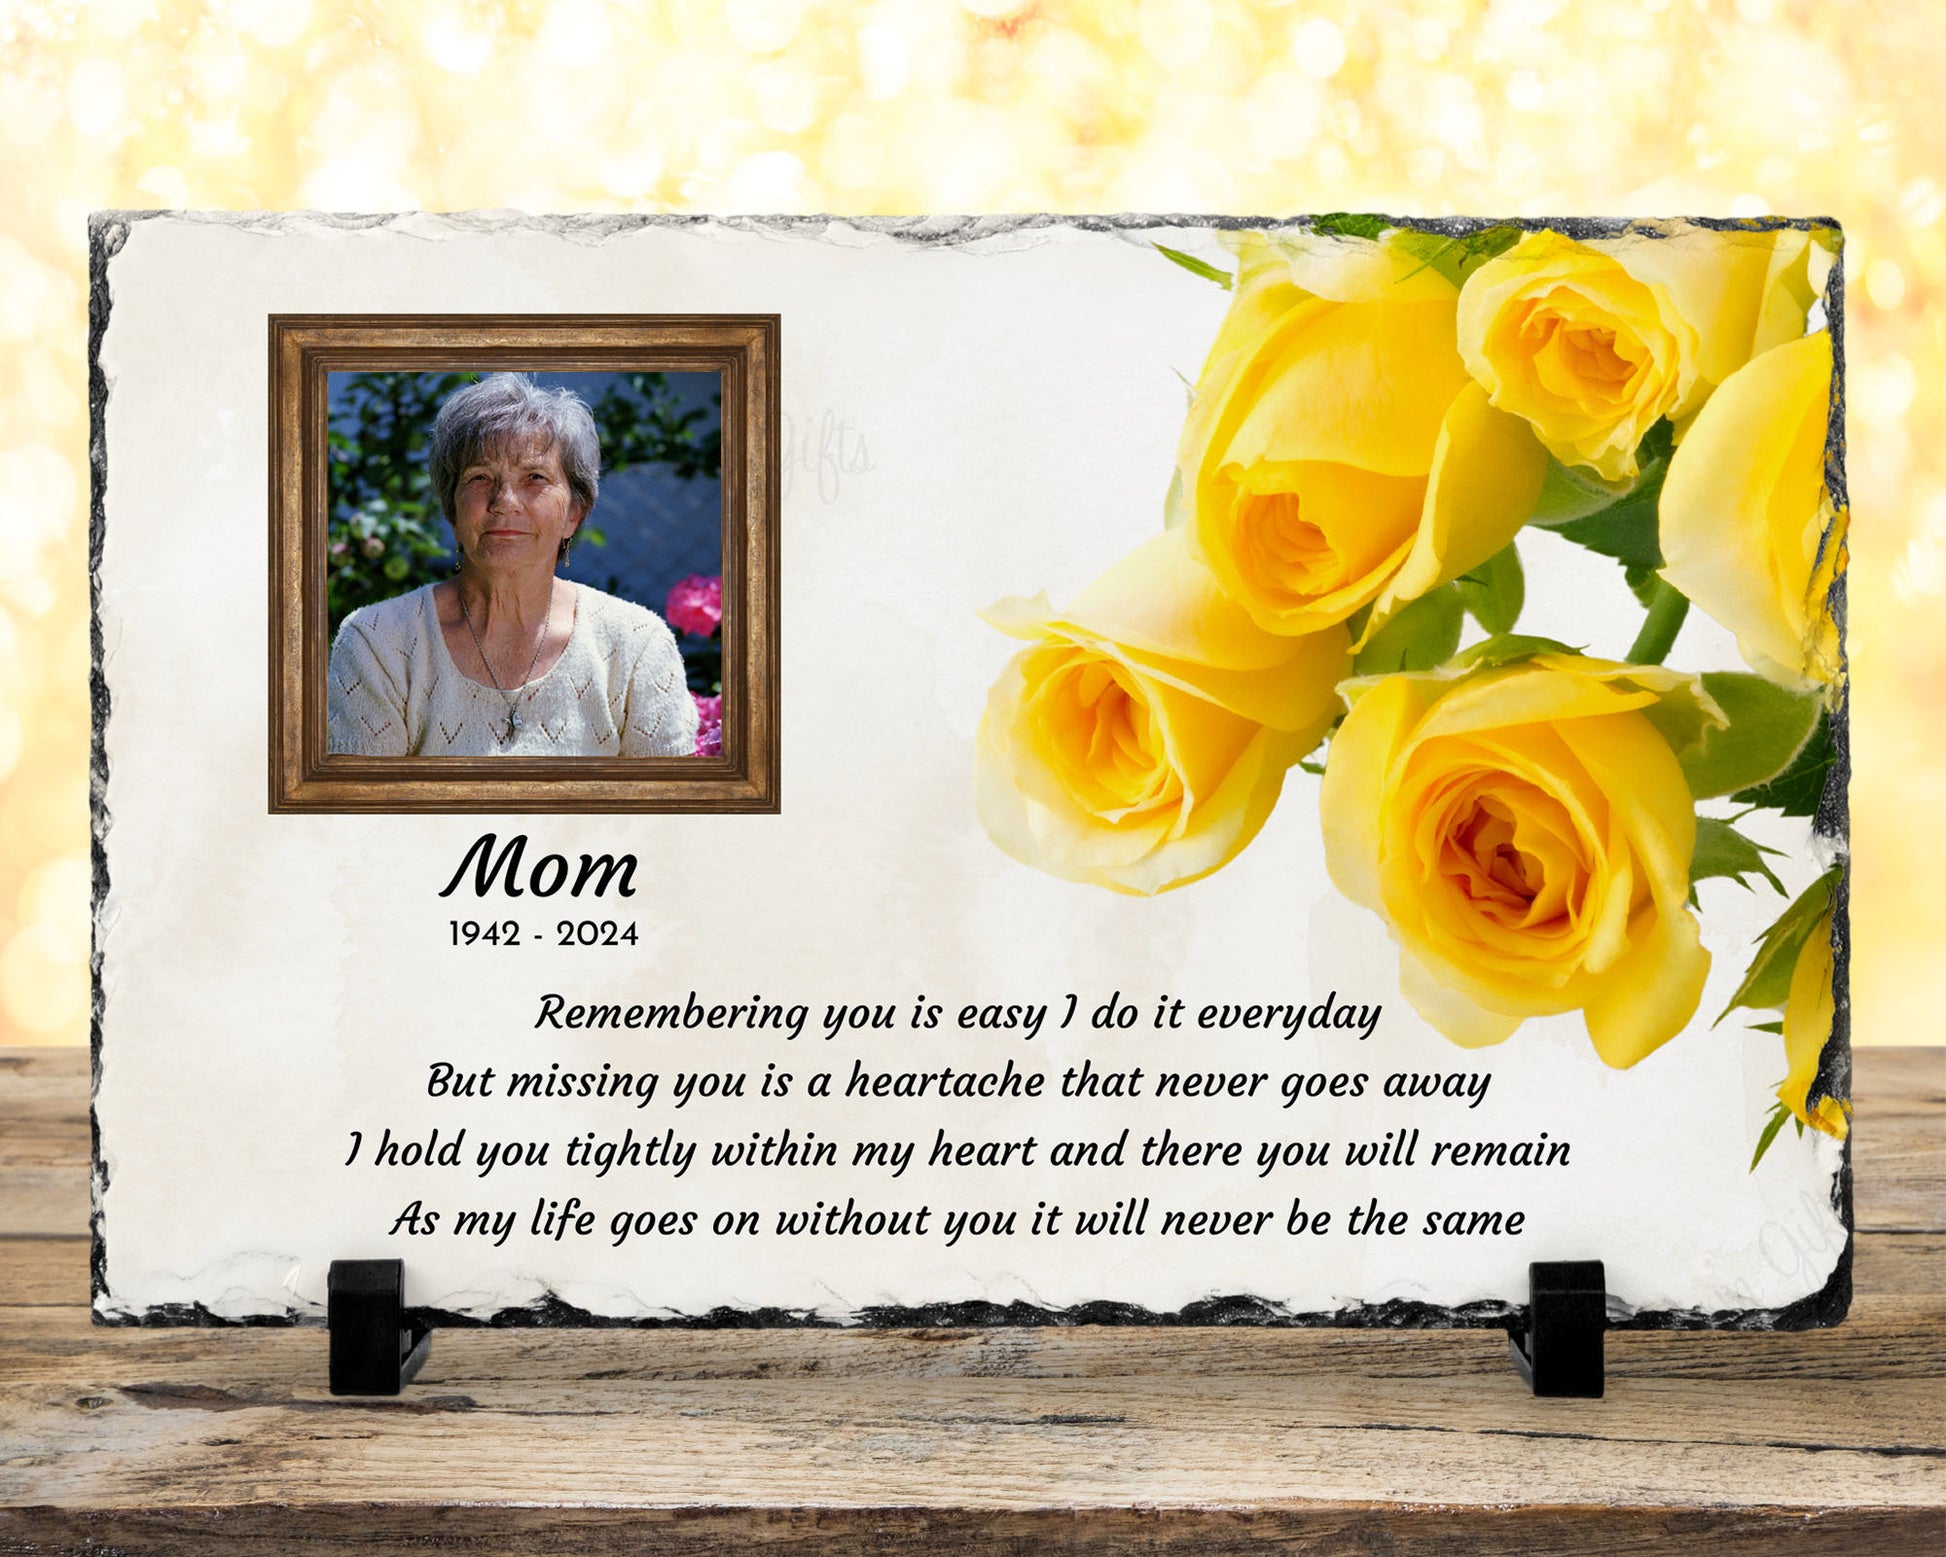 This Memorial Slate serves as a thoughtful gesture for your grieving loved one, expressing your heartfelt care during this difficult time. Alternatively, use it to honor and display the cherished memories of your late loved one. Measuring 7 1/2" x 11"